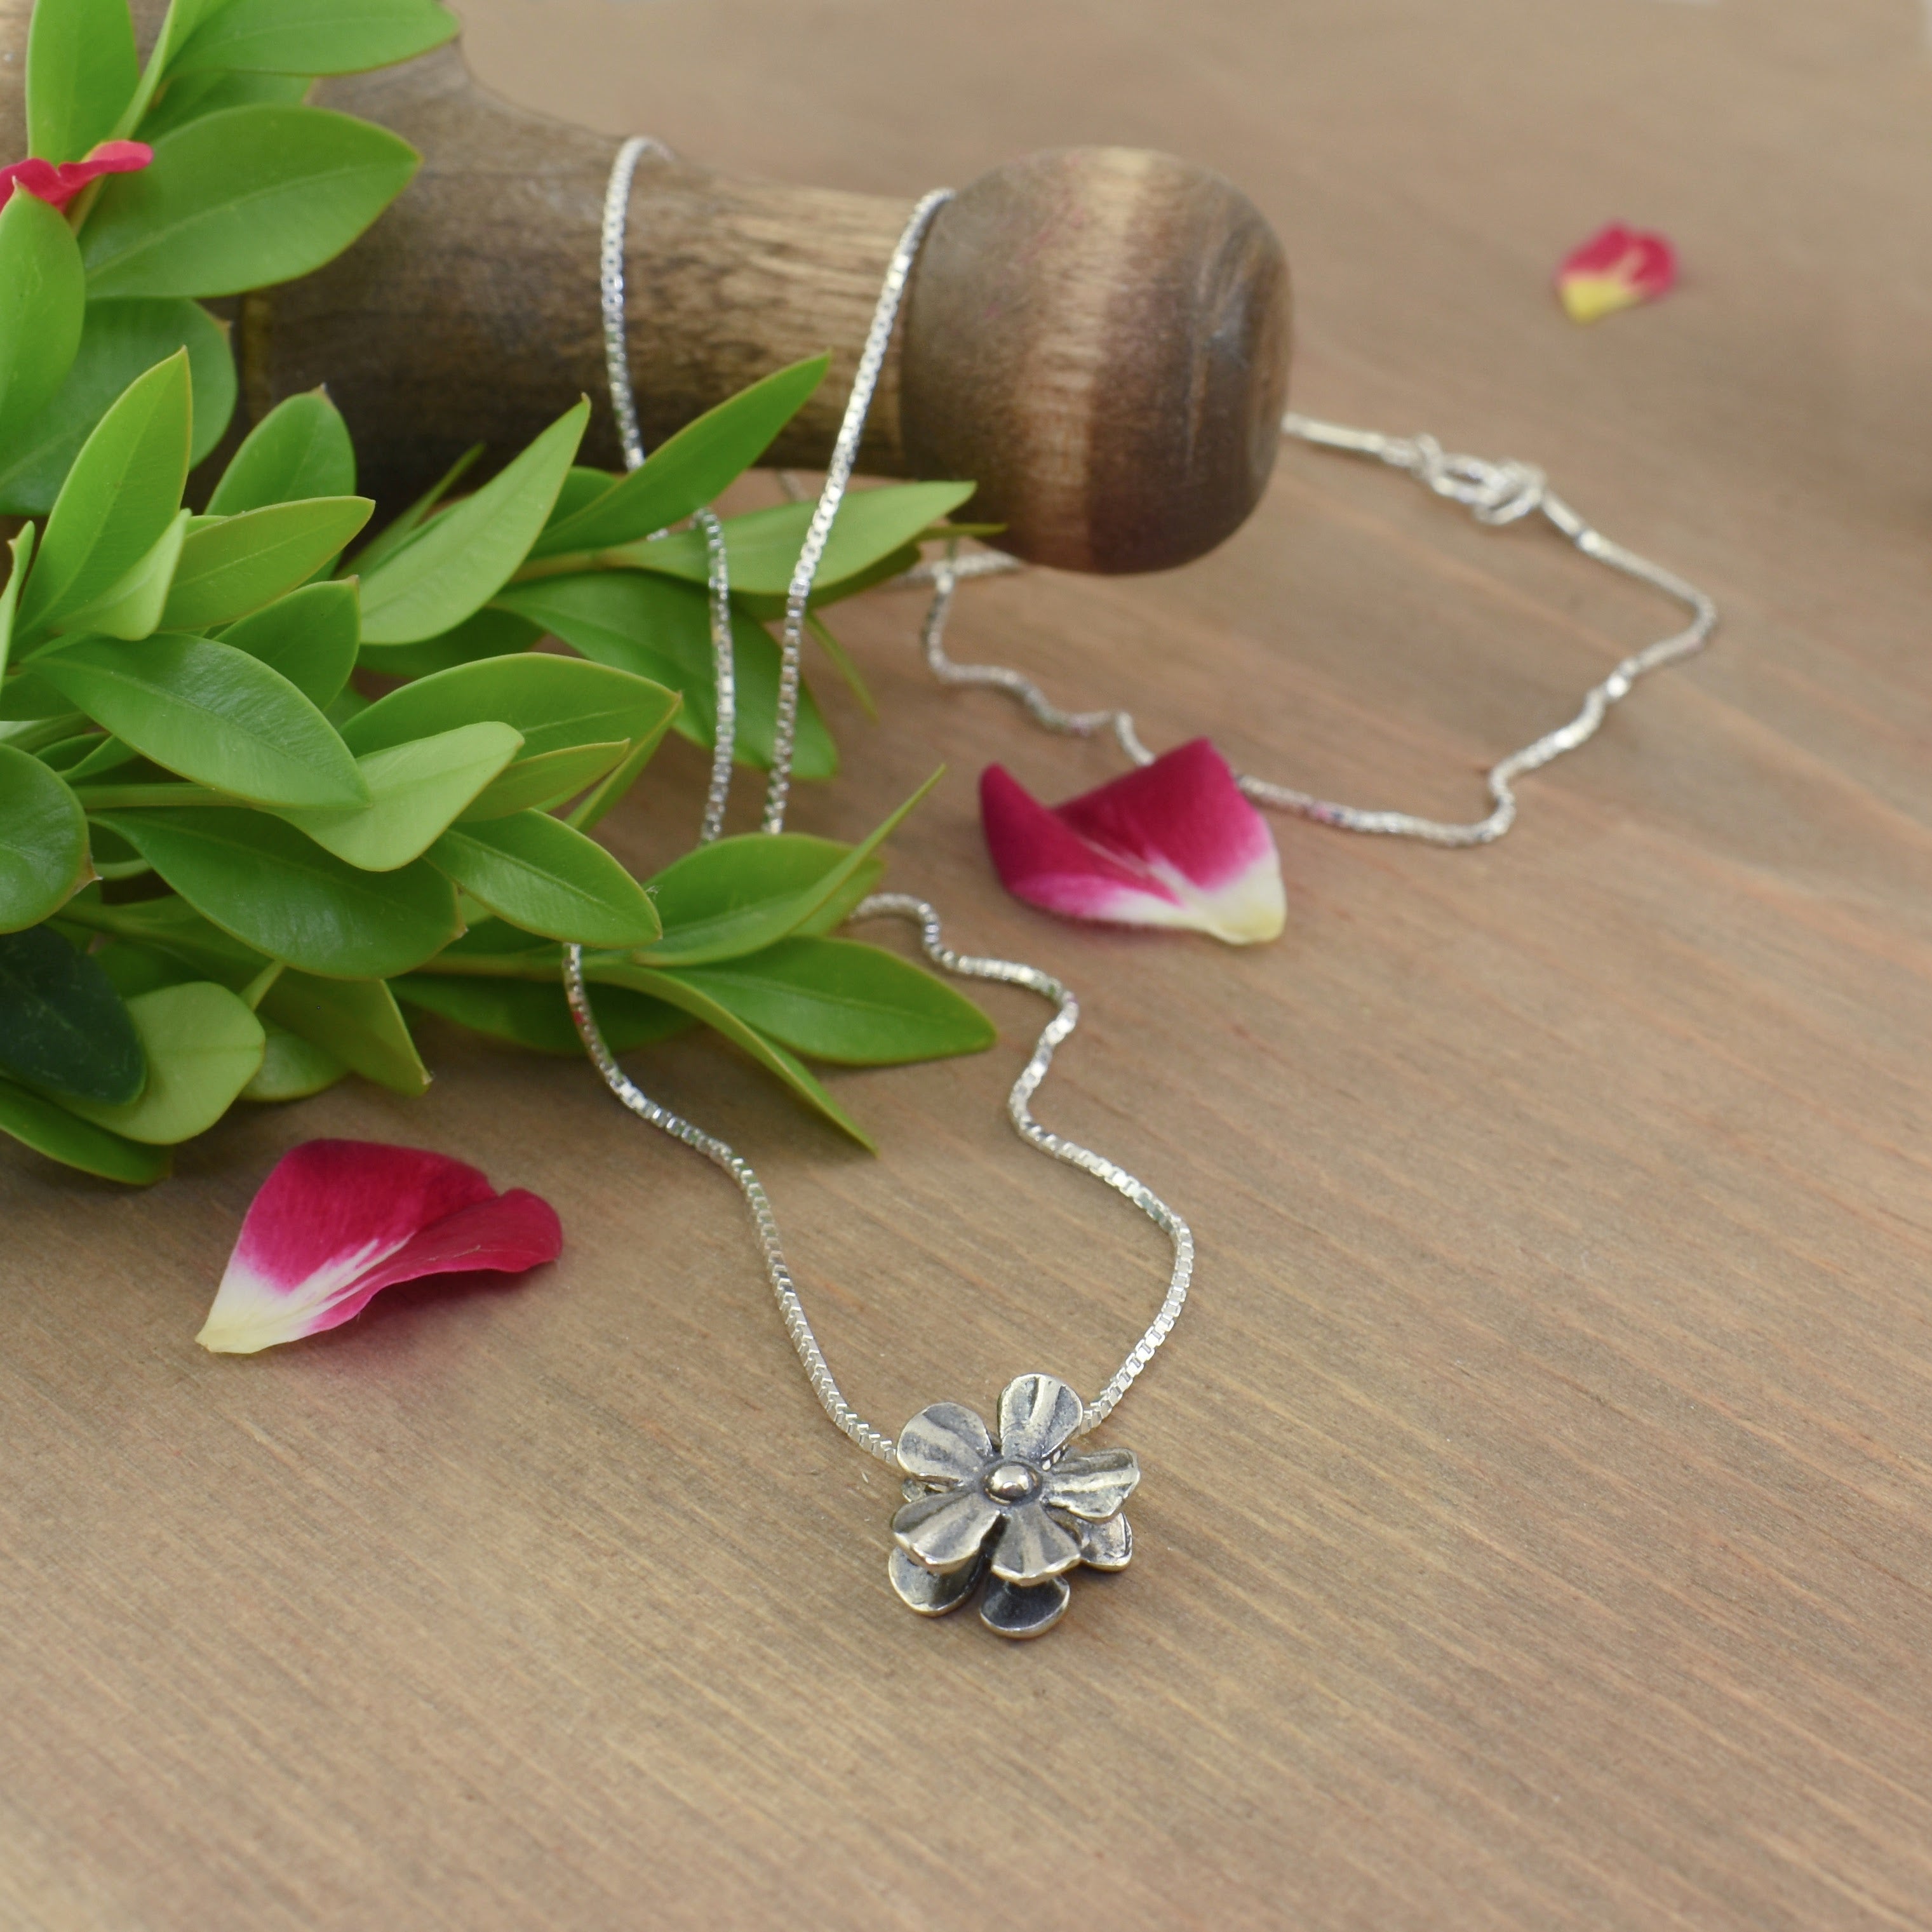 .925 sterling silver flower necklace with oxidized finish